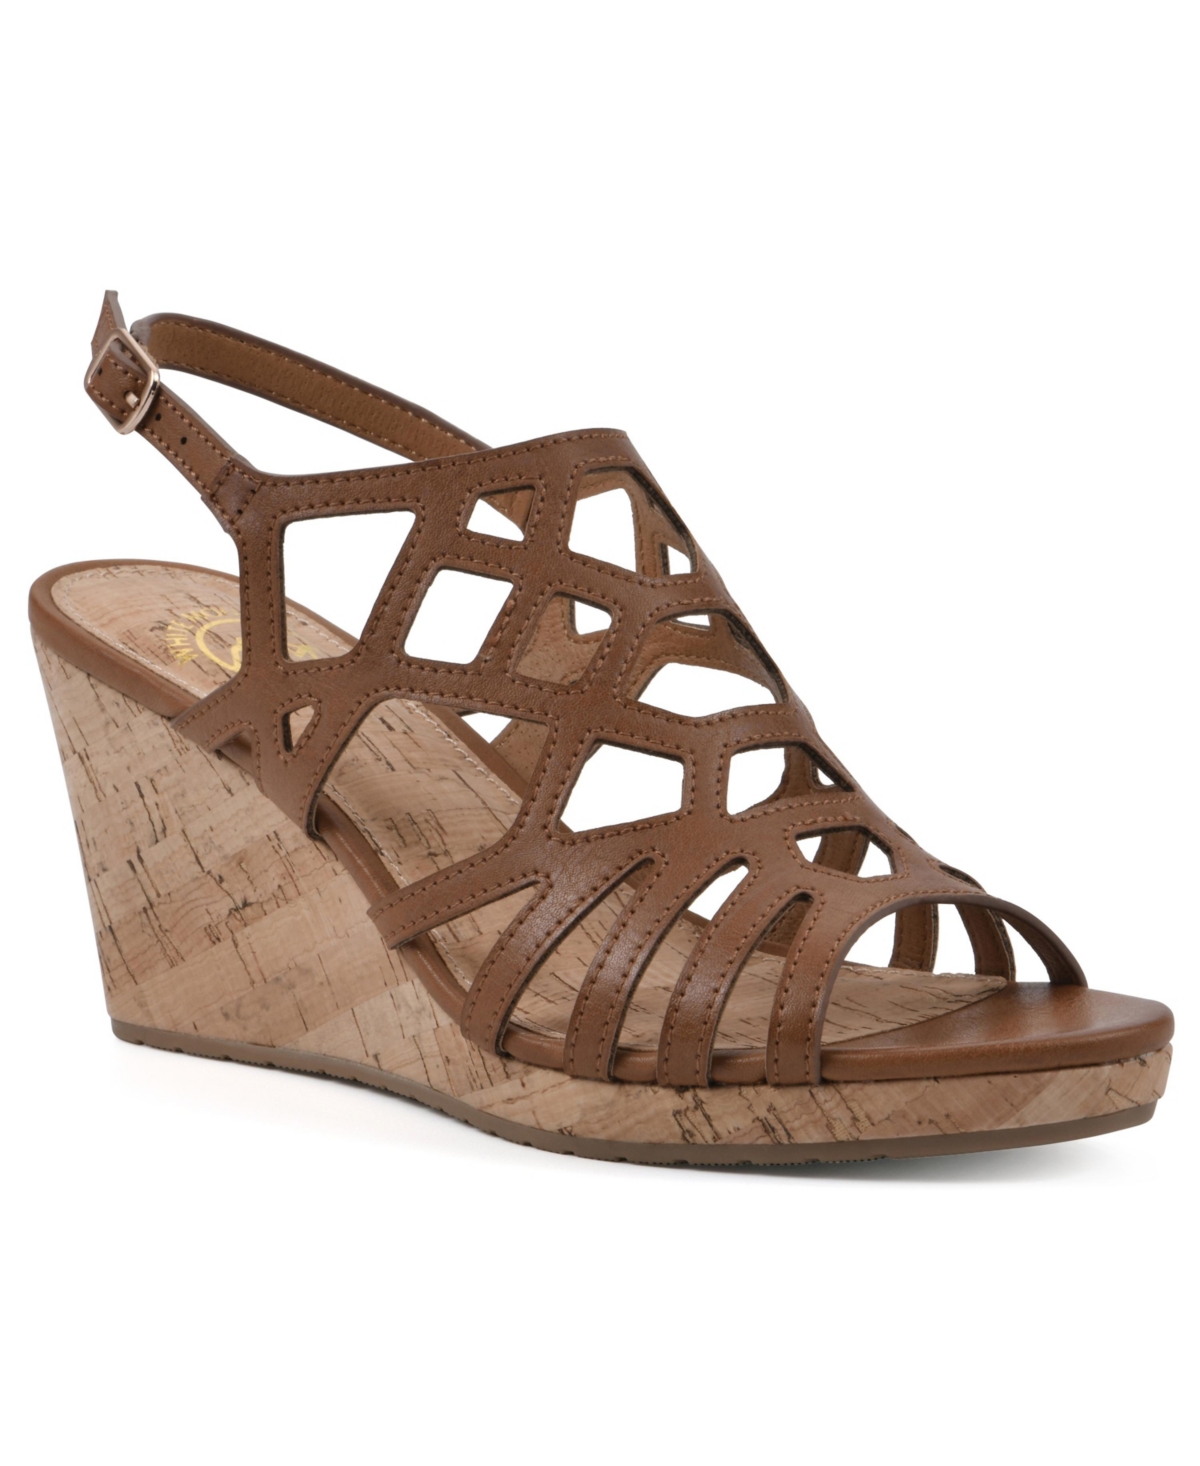 White Mountain Flaming Wedge Sandals In Tan Smooth